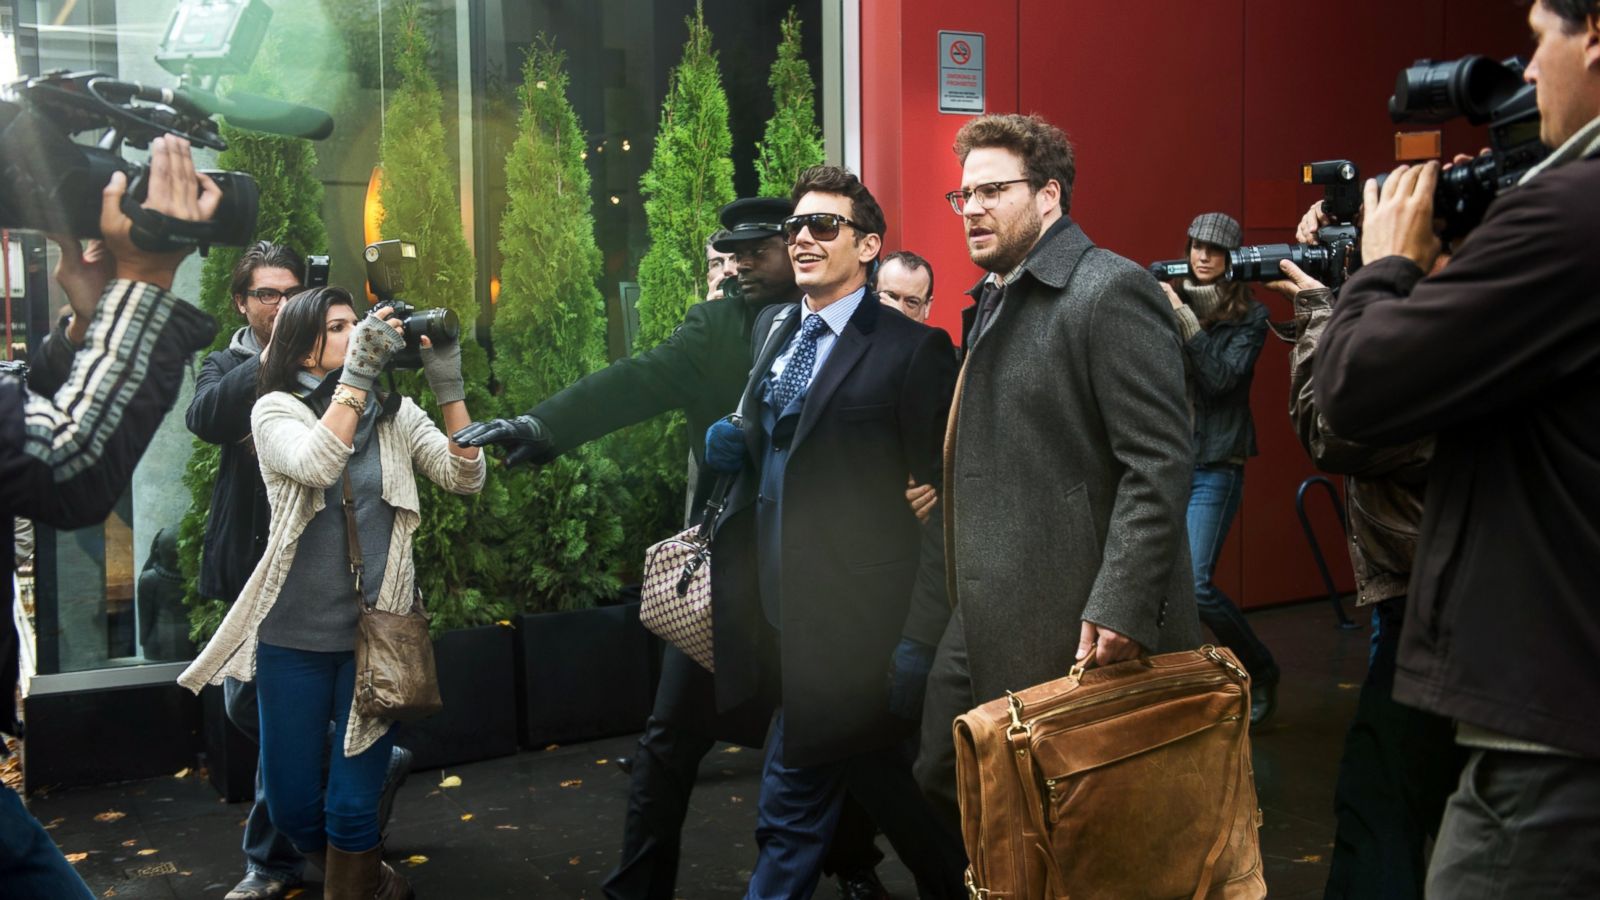 The Interview Movie Review - 2014 Evan Goldberg and Seth Rogen Film